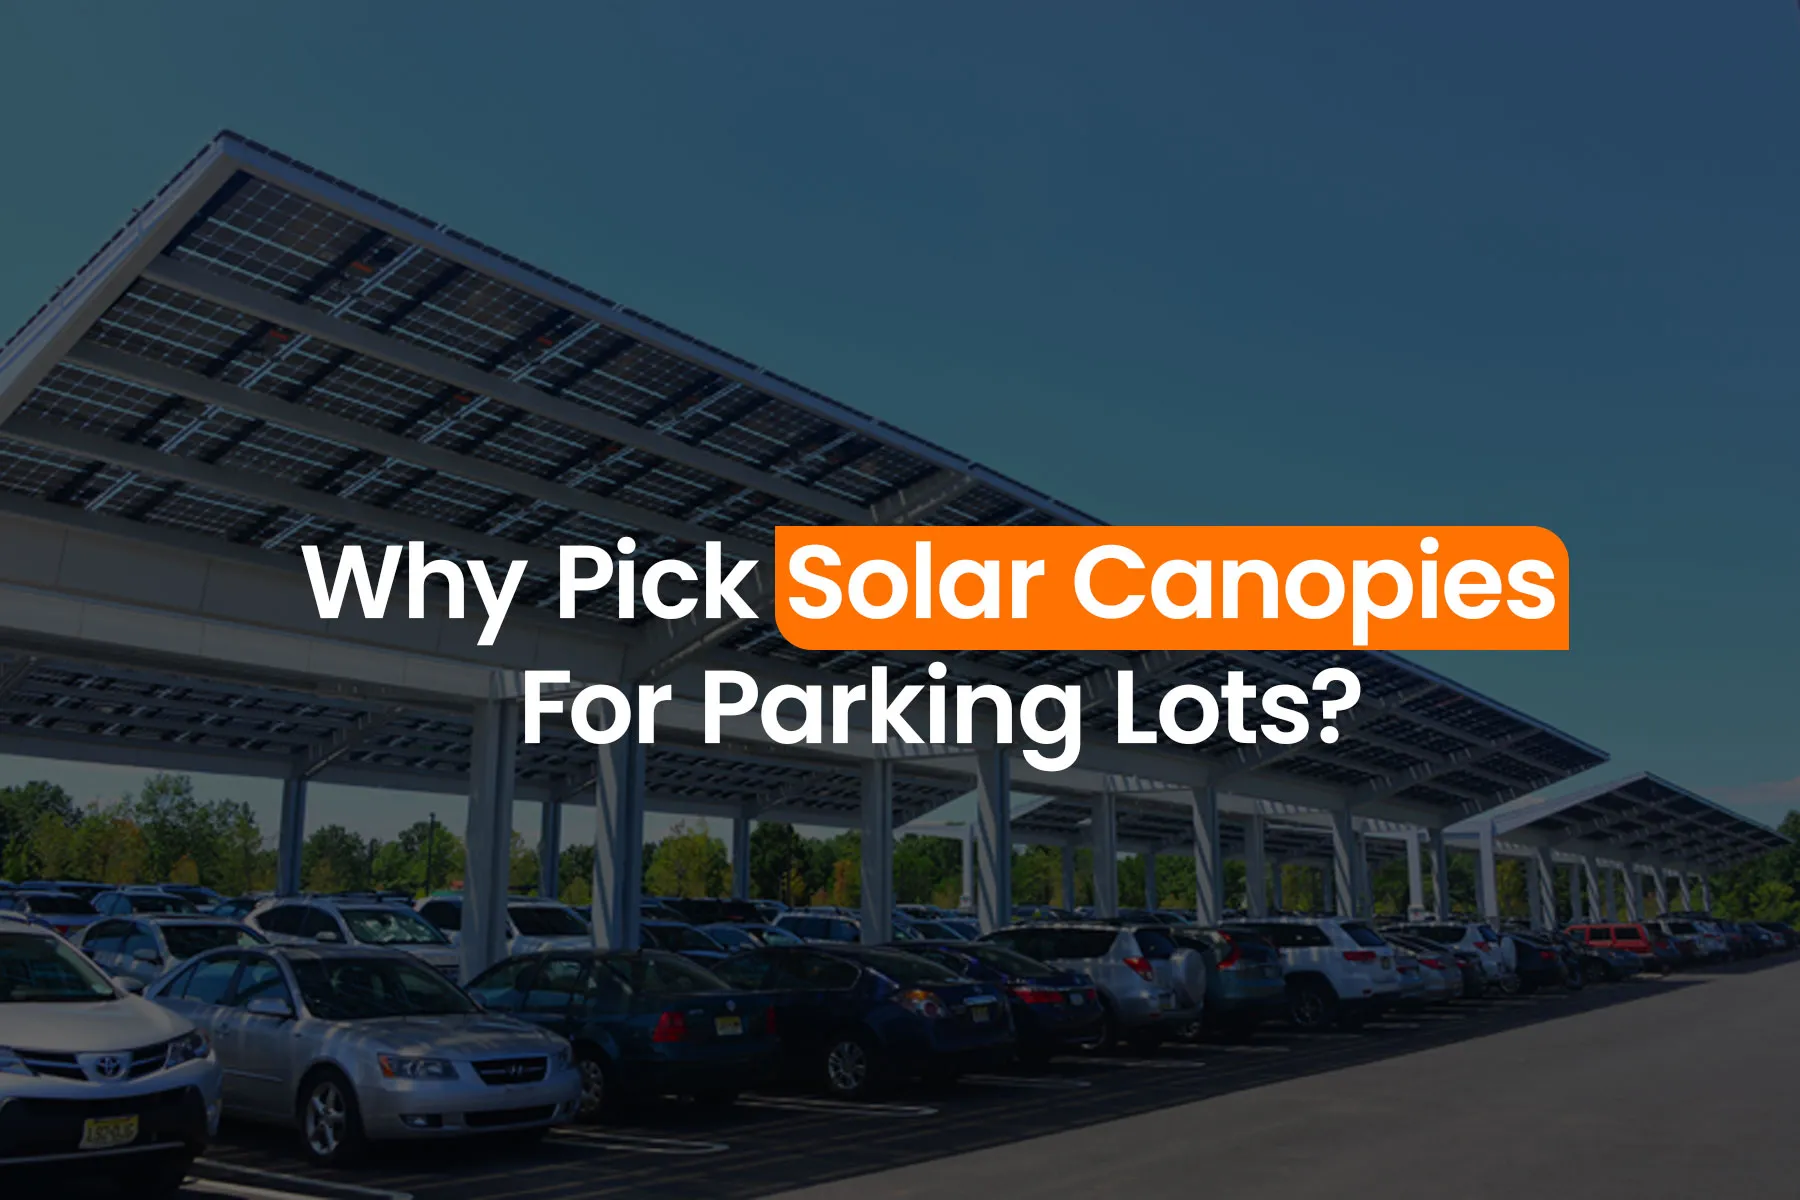 Why Pick Solar Canopies For Parking Lots?